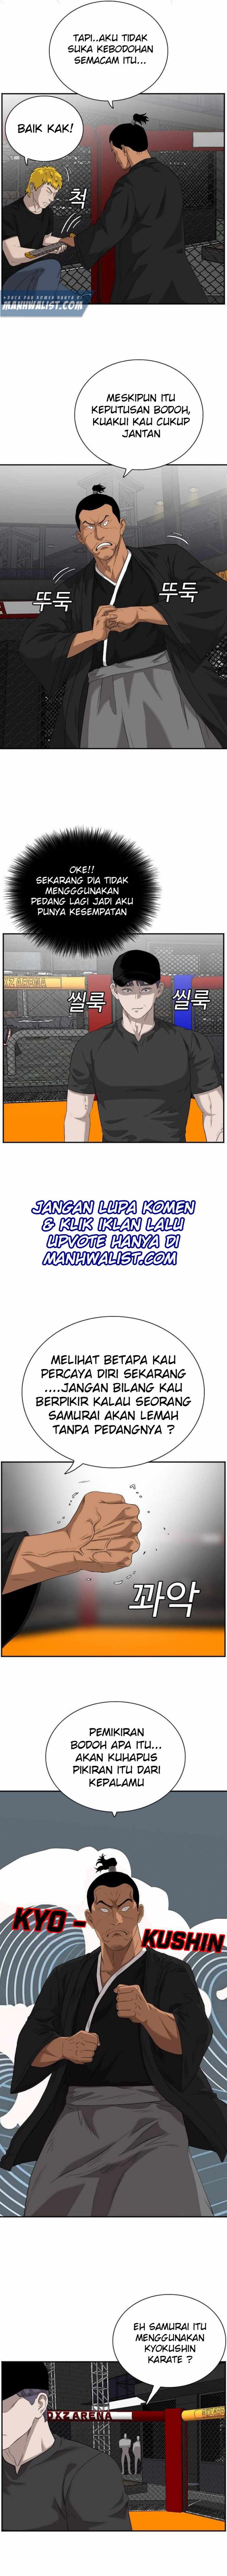 A Bad Person Chapter 99